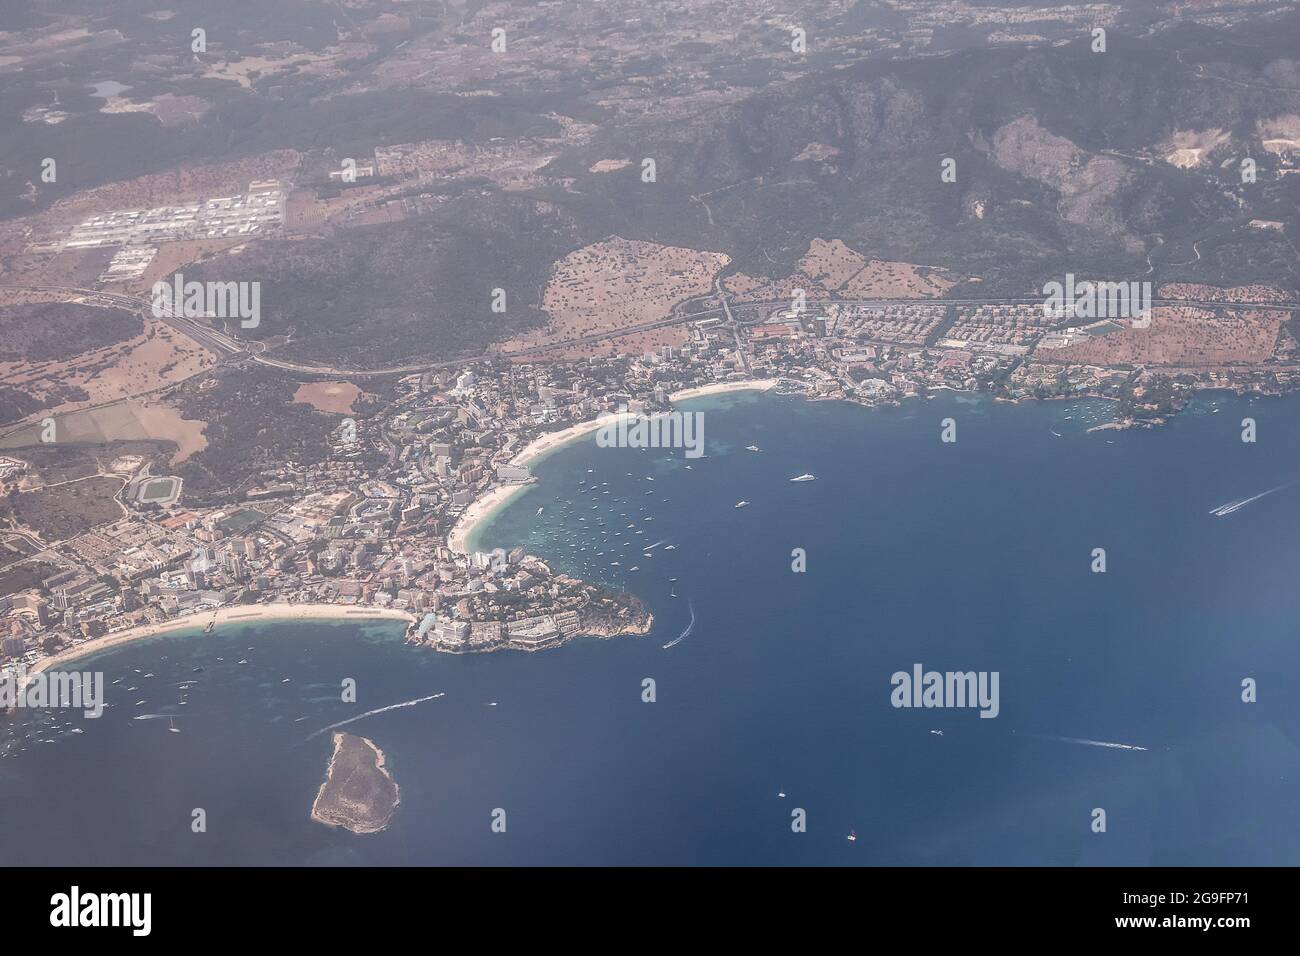 The beaches of Magaluf, Torrenova and Palmanova in Mallorca, Spain from the air Stock Photo